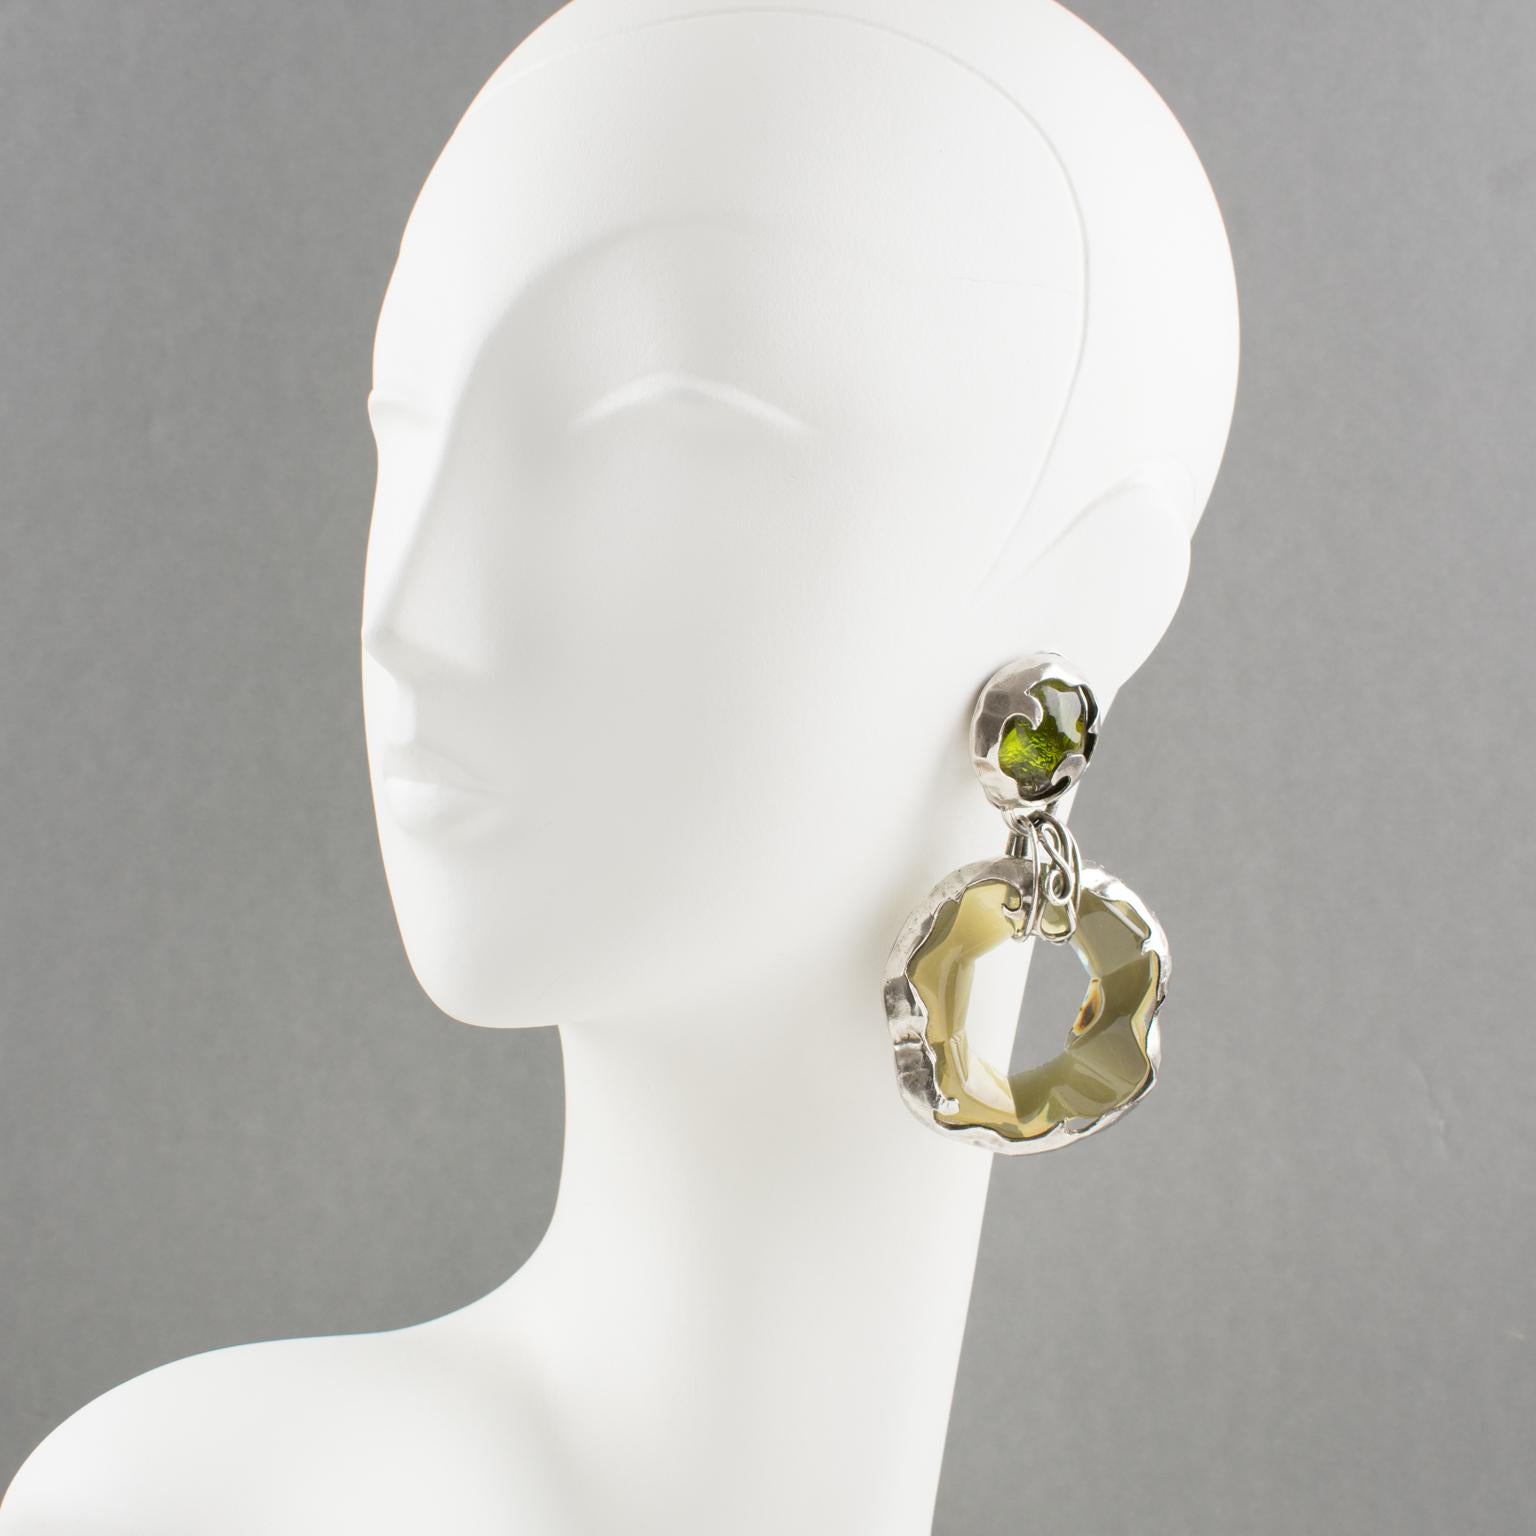 Stunning oversized dangling clip-on earrings. Brutalist design with chandelier shape, featuring a large dangle donut with silverplate metal carved frame compliment with transparent olive green Lucite carved insert element. No visible maker's